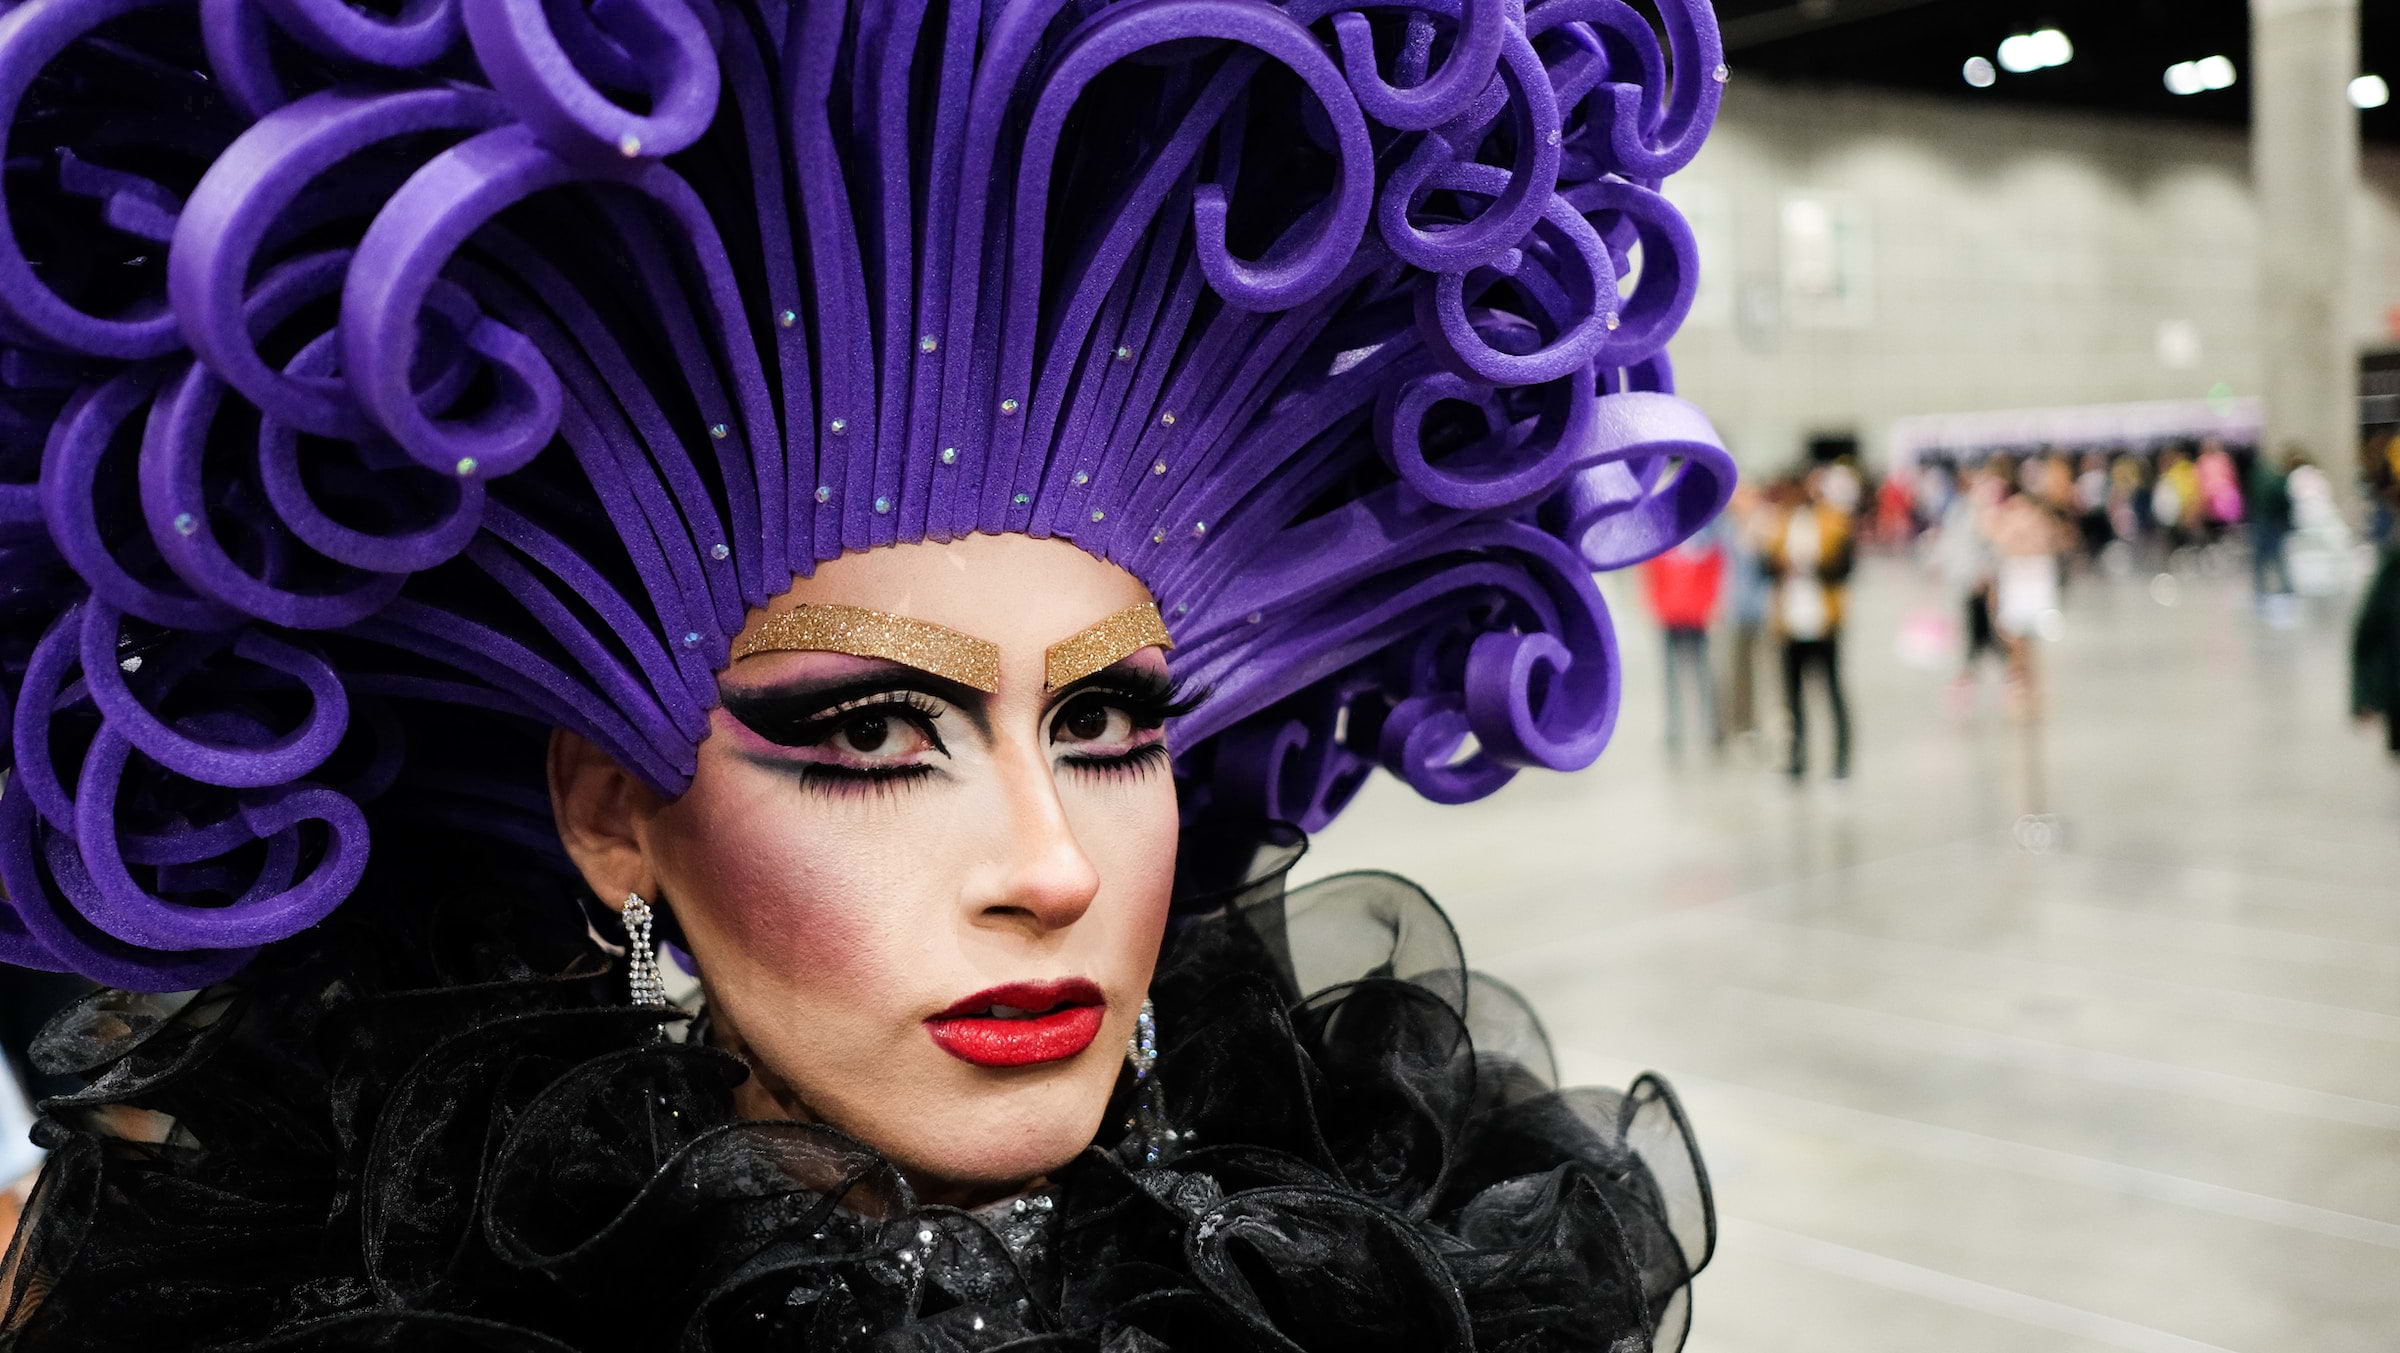 Where to see the best drag shows in London